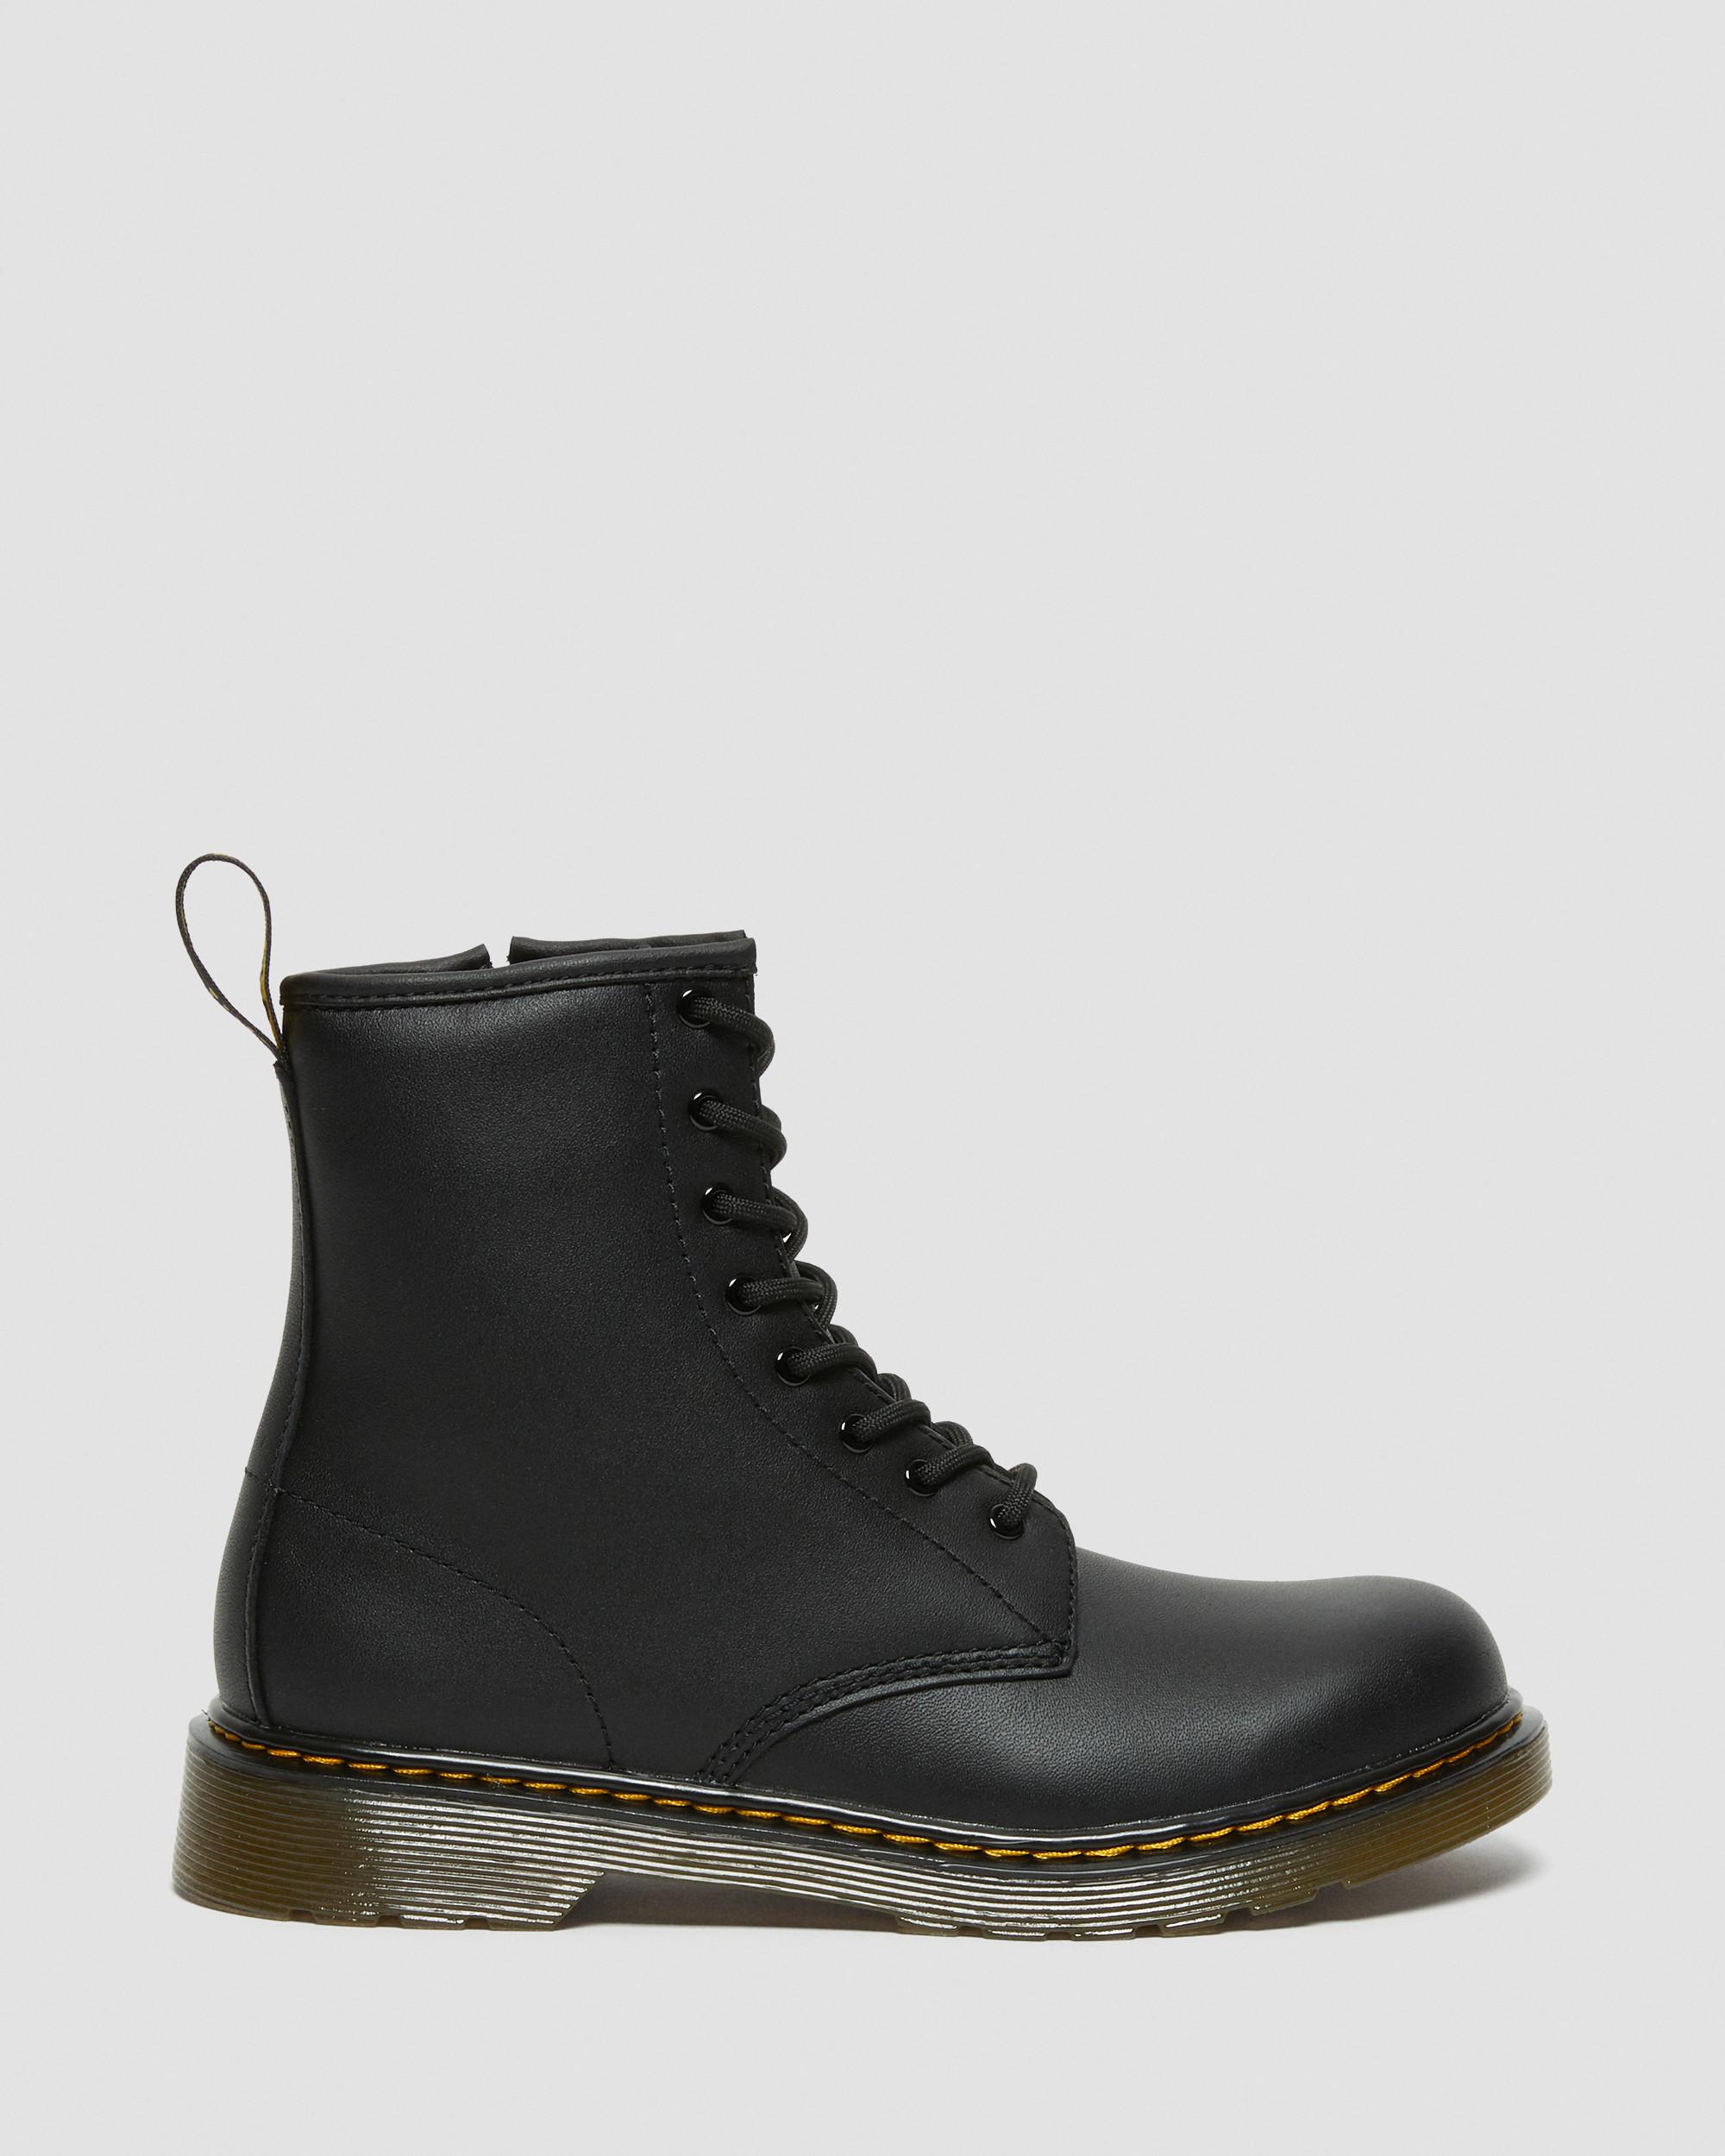 Youth 1460 Black | Boots Leather Martens in Softy Lace Dr. Up T